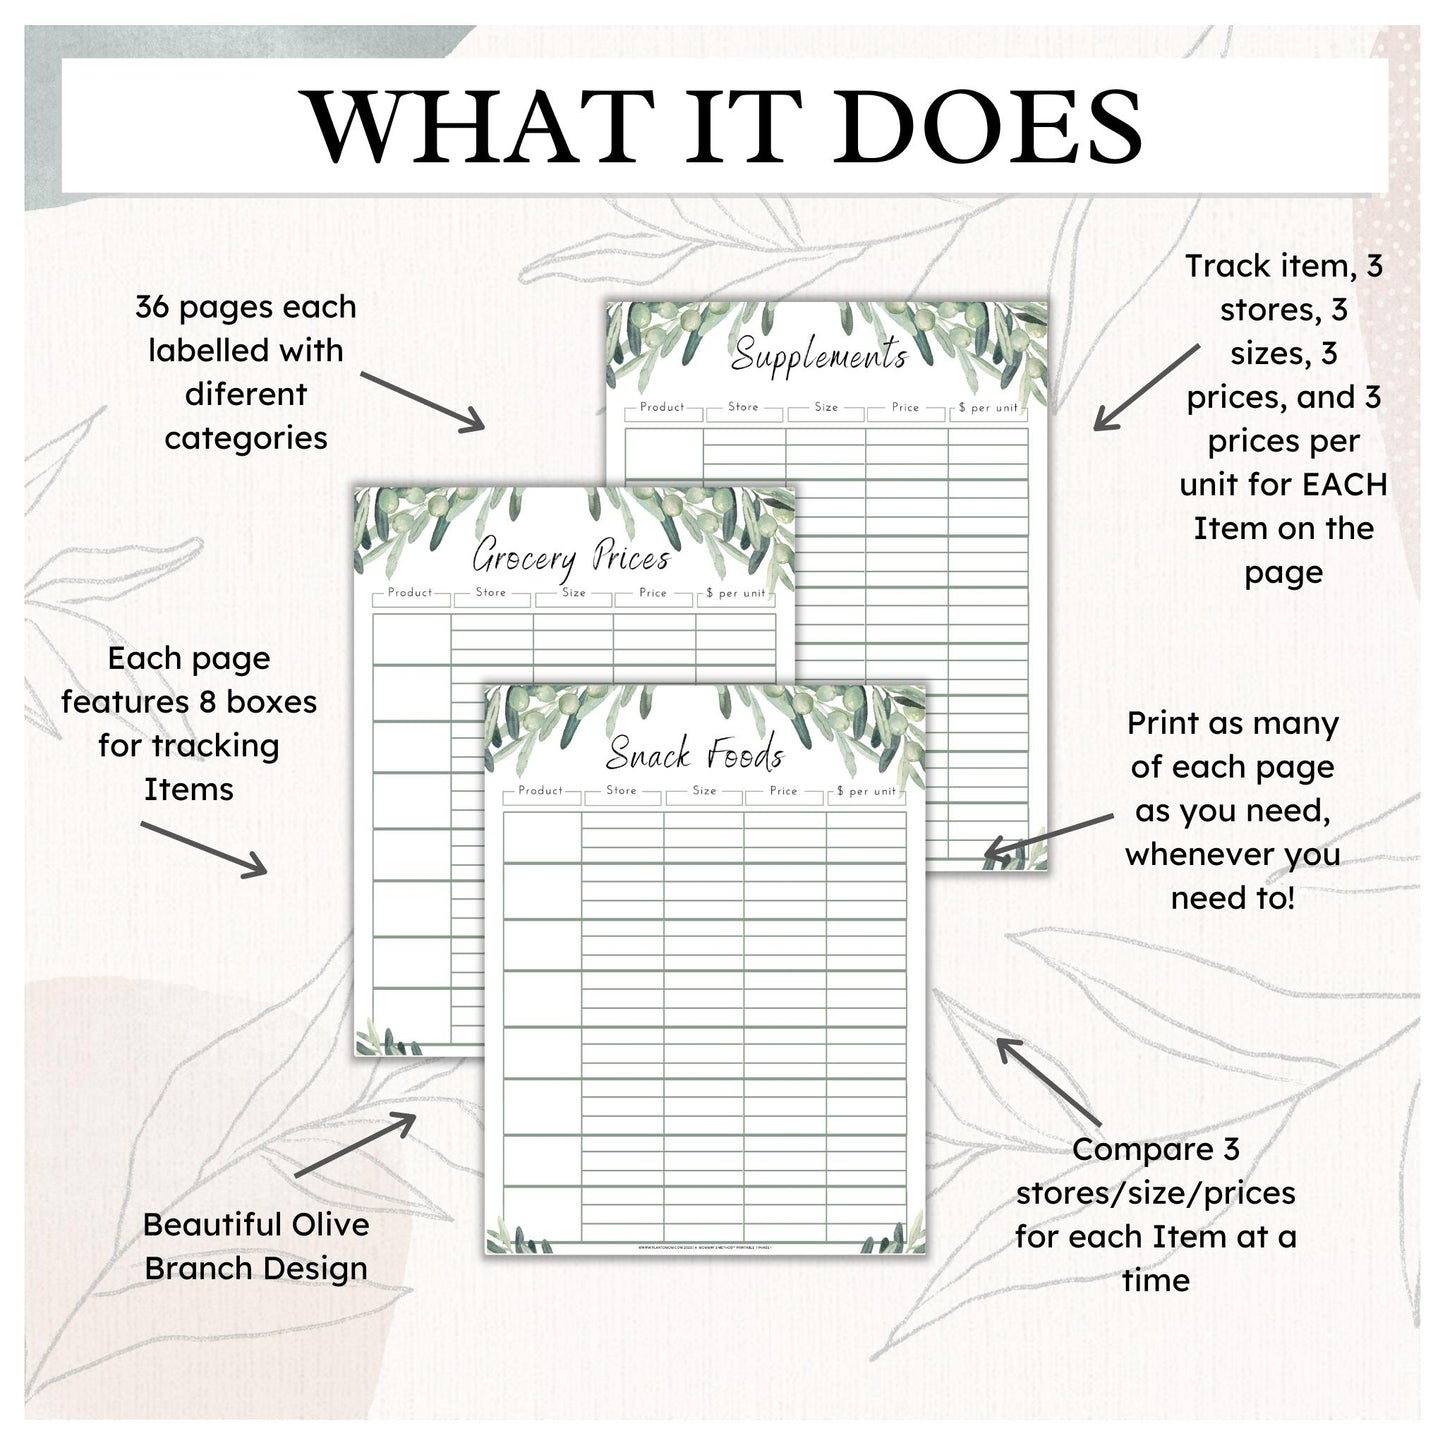 Grocery Assistant - Olive Branches - Printable PDF - US LETTER